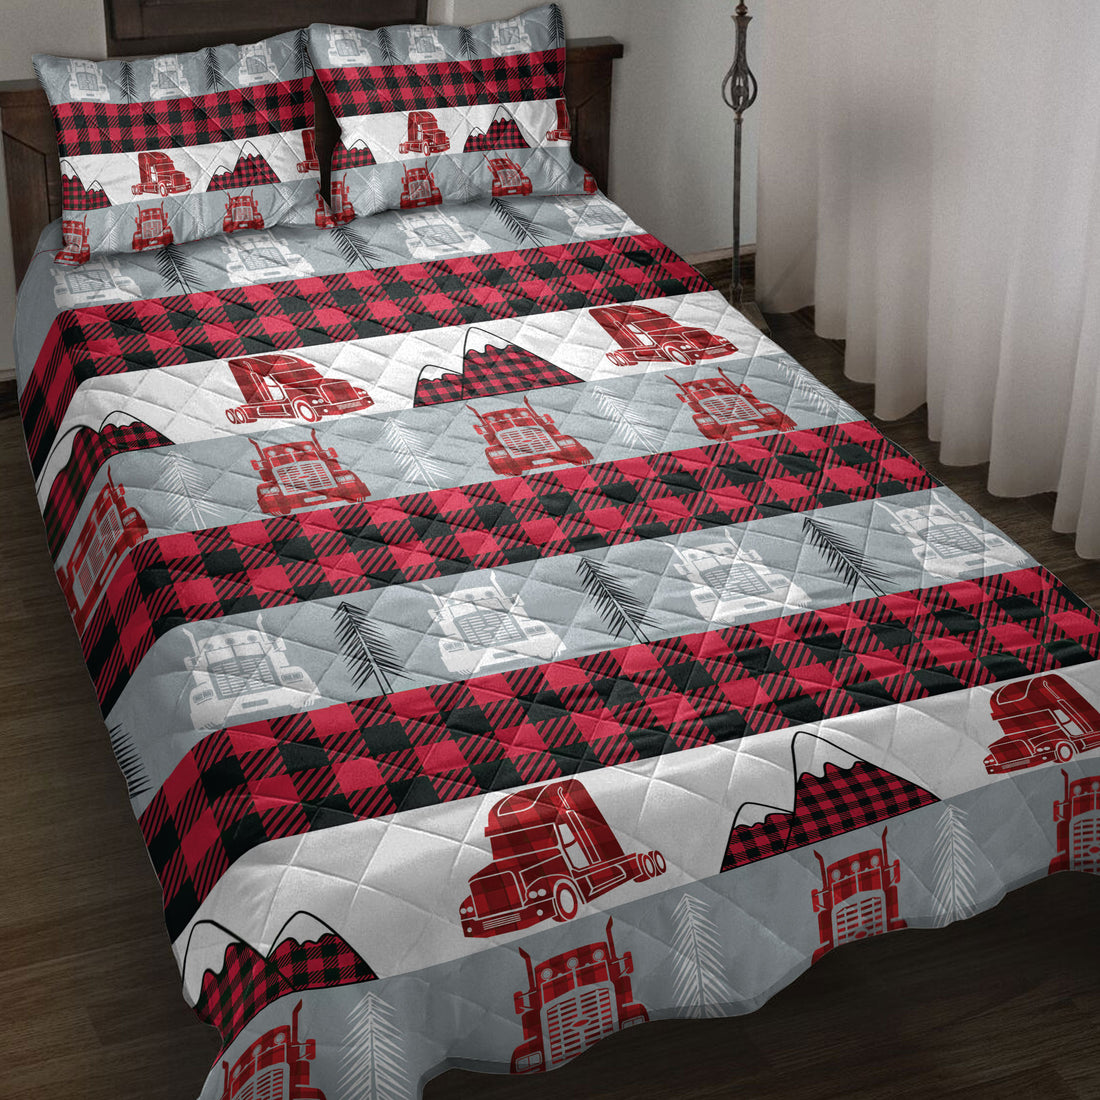 Ohaprints-Quilt-Bed-Set-Pillowcase-Christmas-Red-Truck-Trucker-Red-Buffalo-Plaid-Winter-Holiday-Blanket-Bedspread-Bedding-4088-Throw (55'' x 60'')